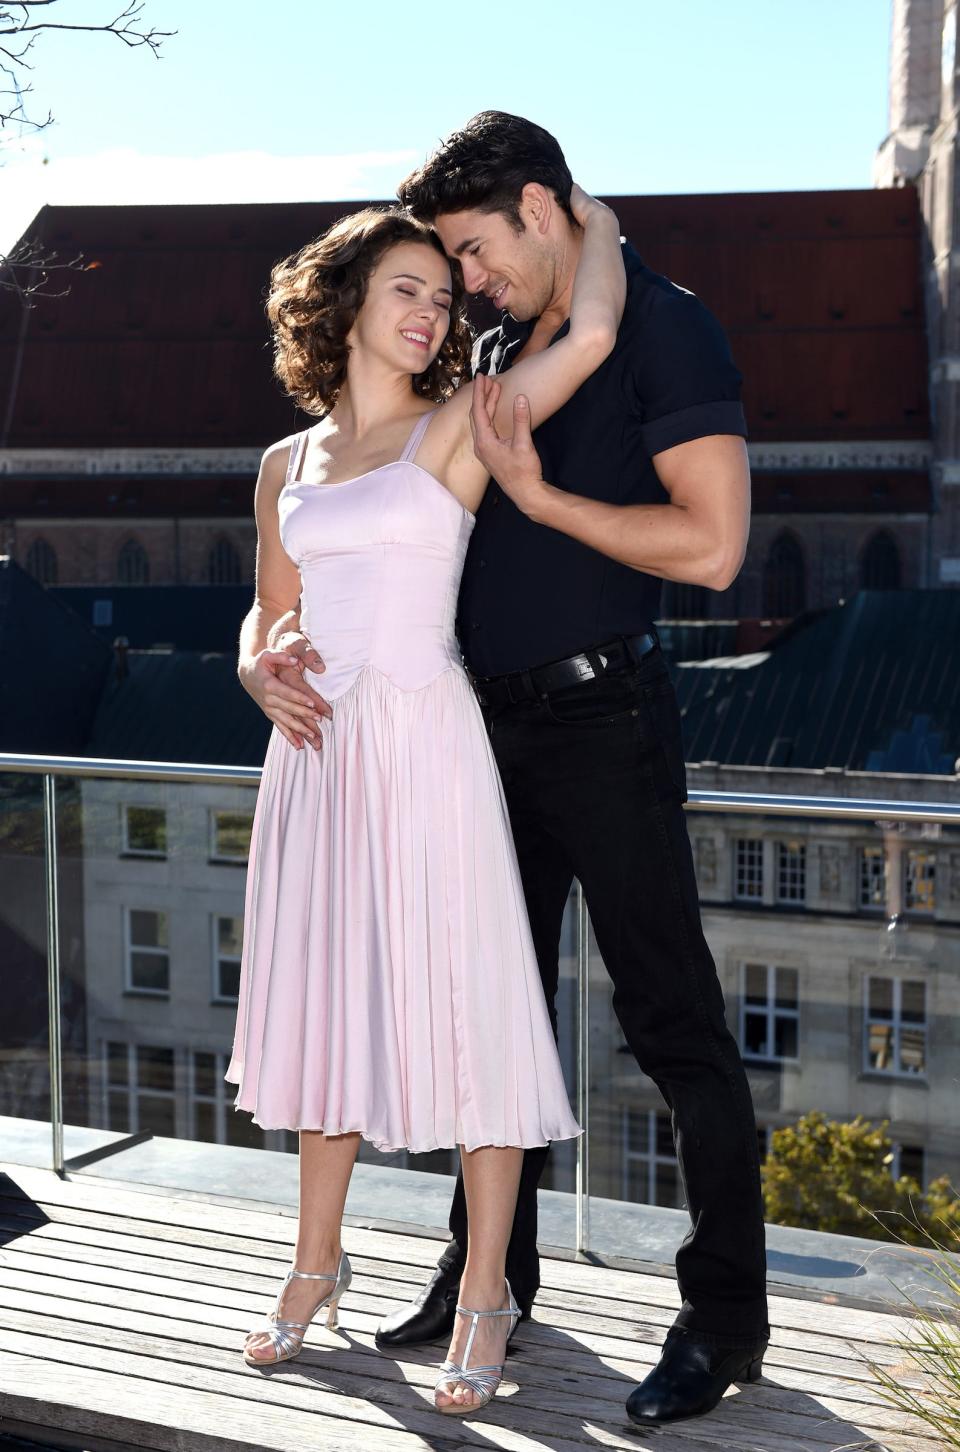 A Dirty Dancing Halloween couples costume